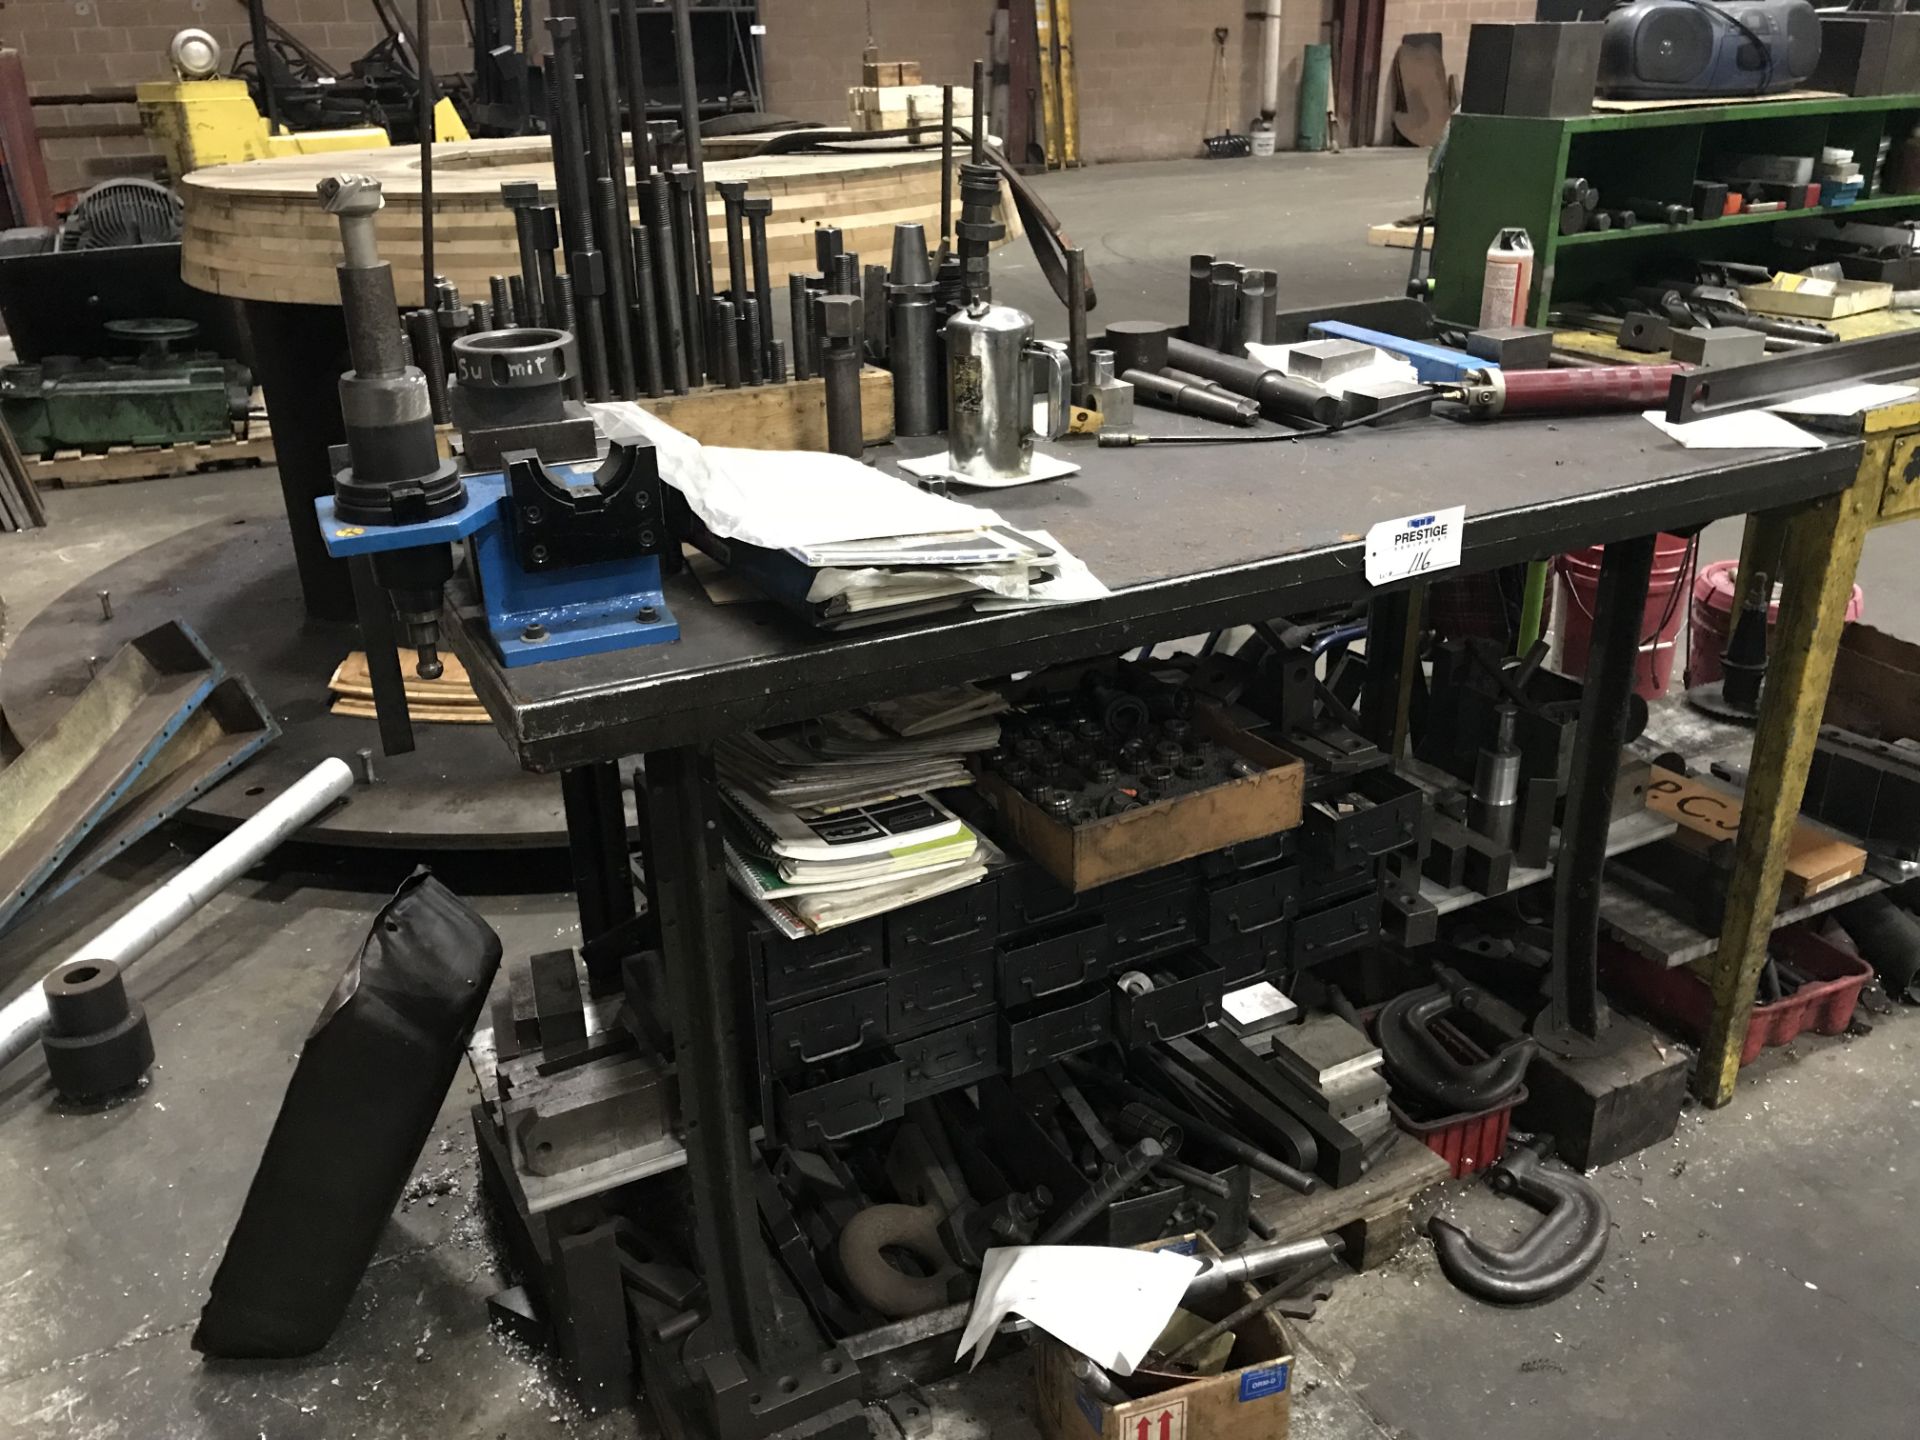 6' Steel Work Bench with Tool Holder Locking Device and Contents